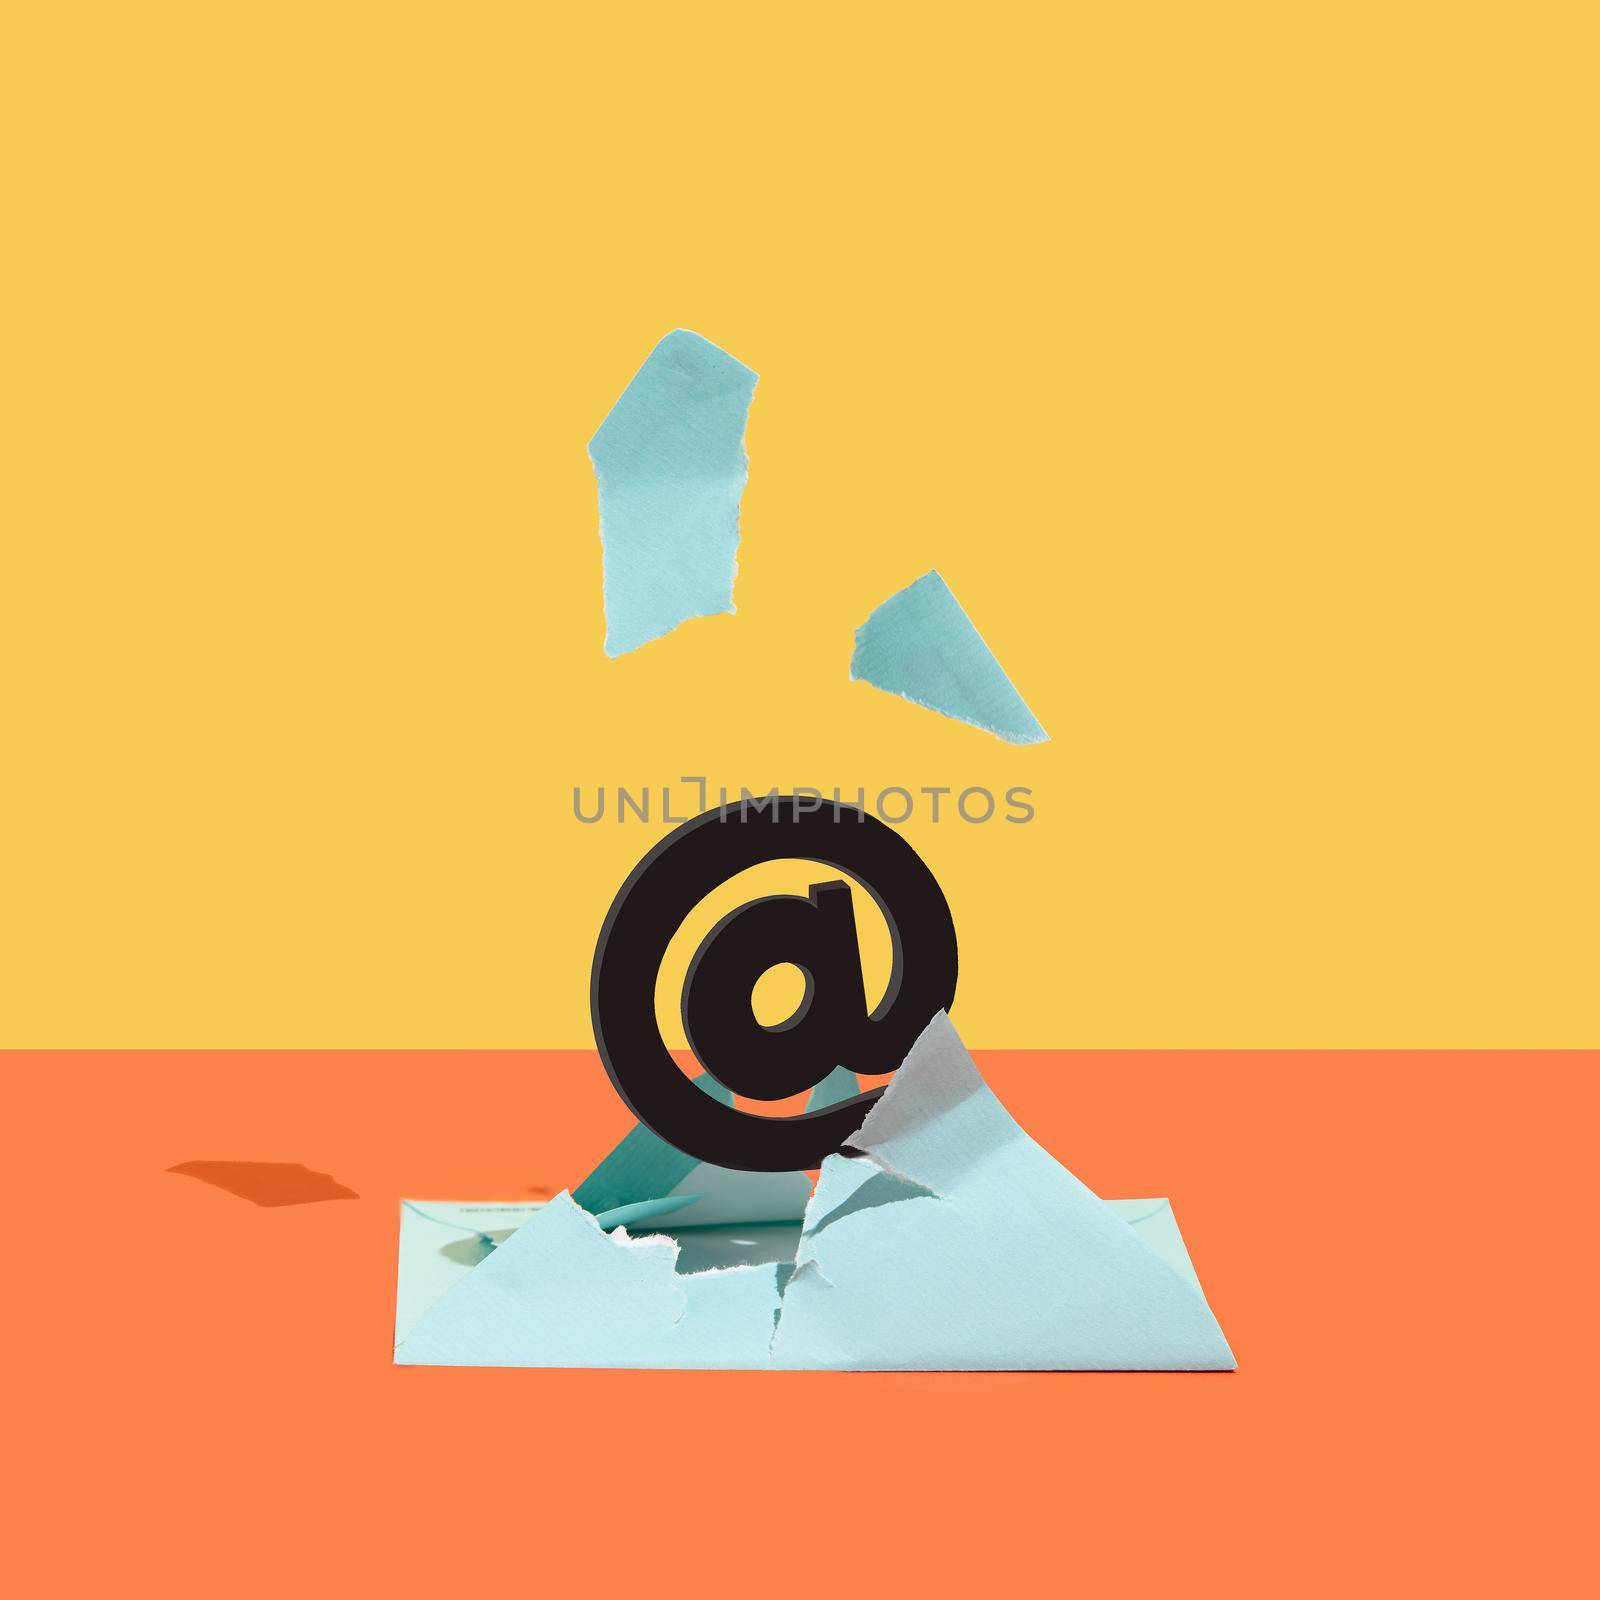 At, email sign, burst out of a blue envelope against orange and yellow background. by Nemo_Family